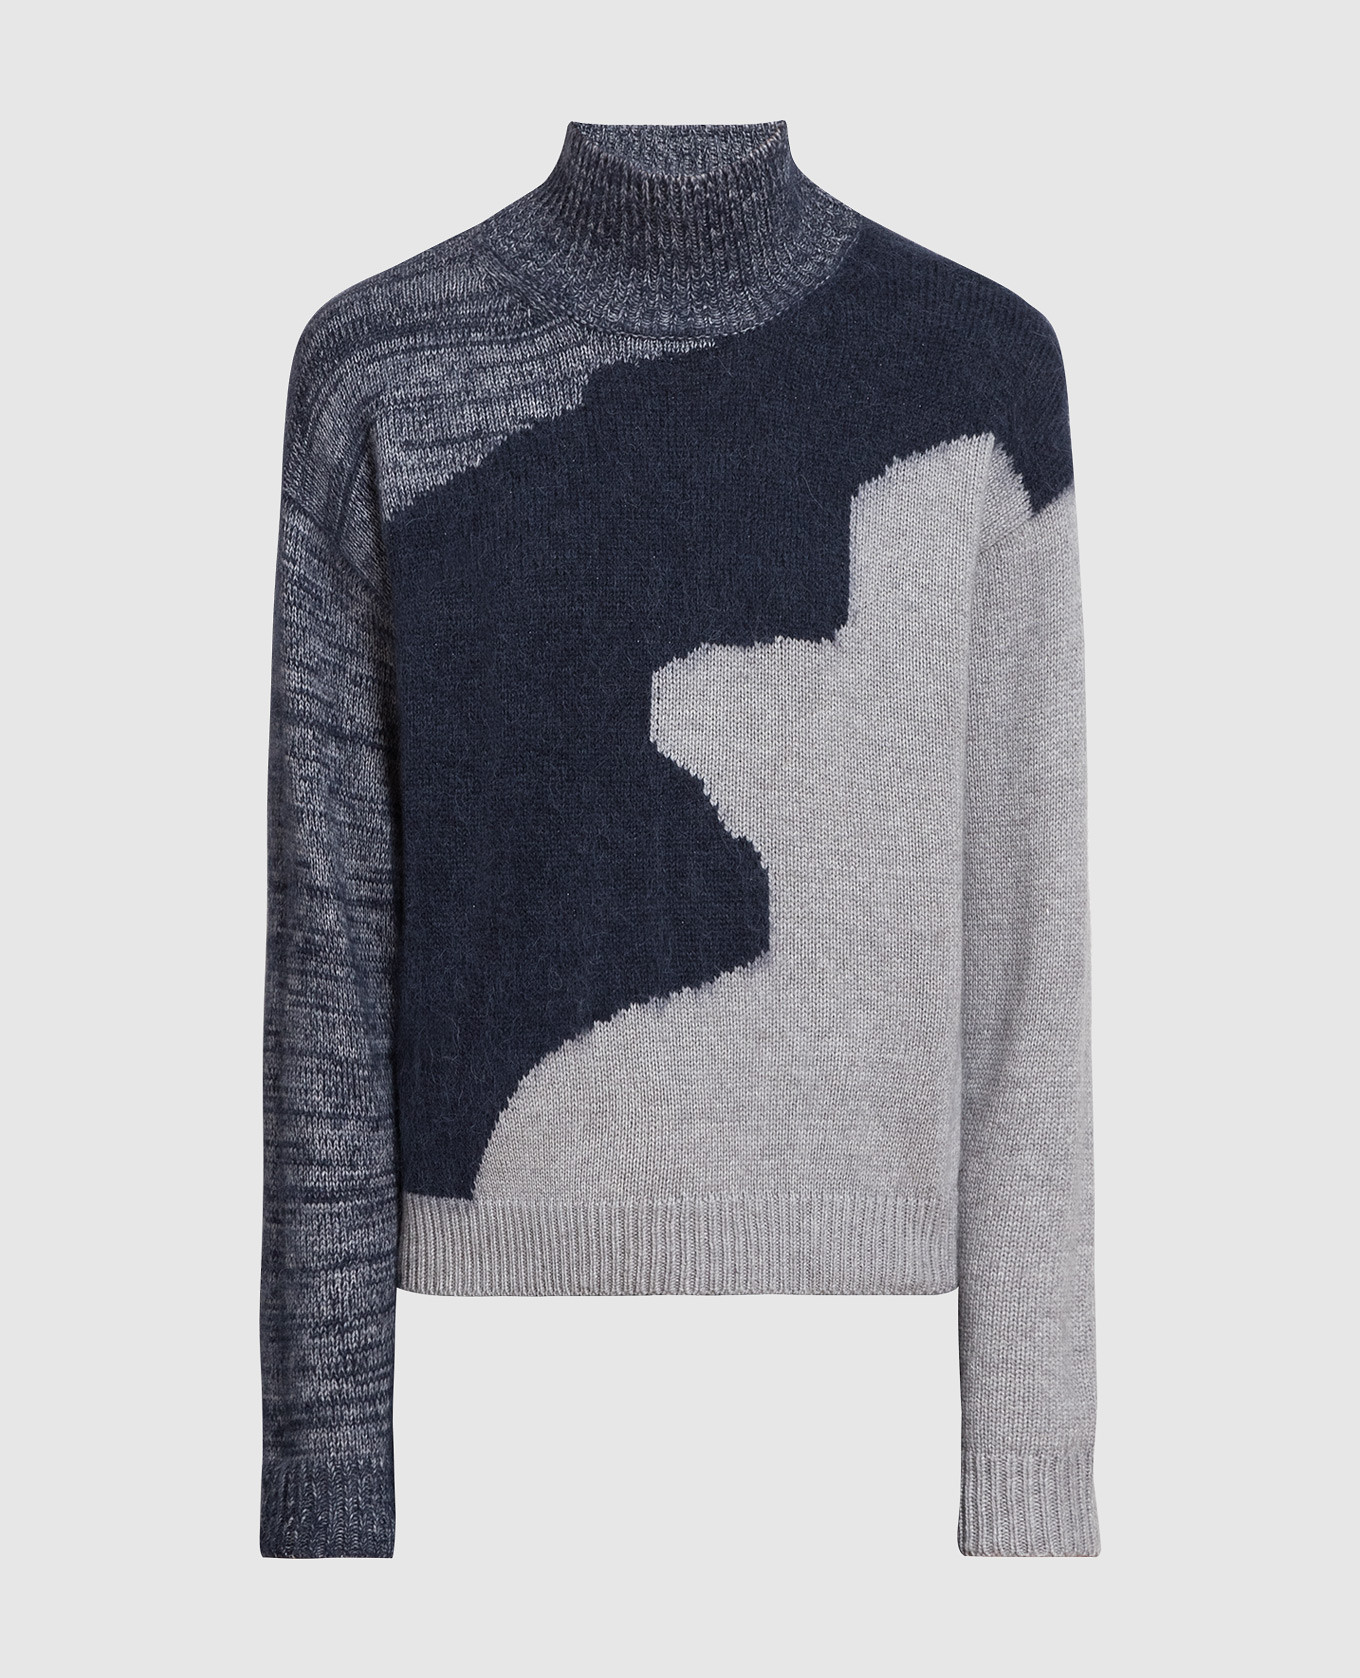 Blue sweater made of wool, silk and cashmere with a pattern